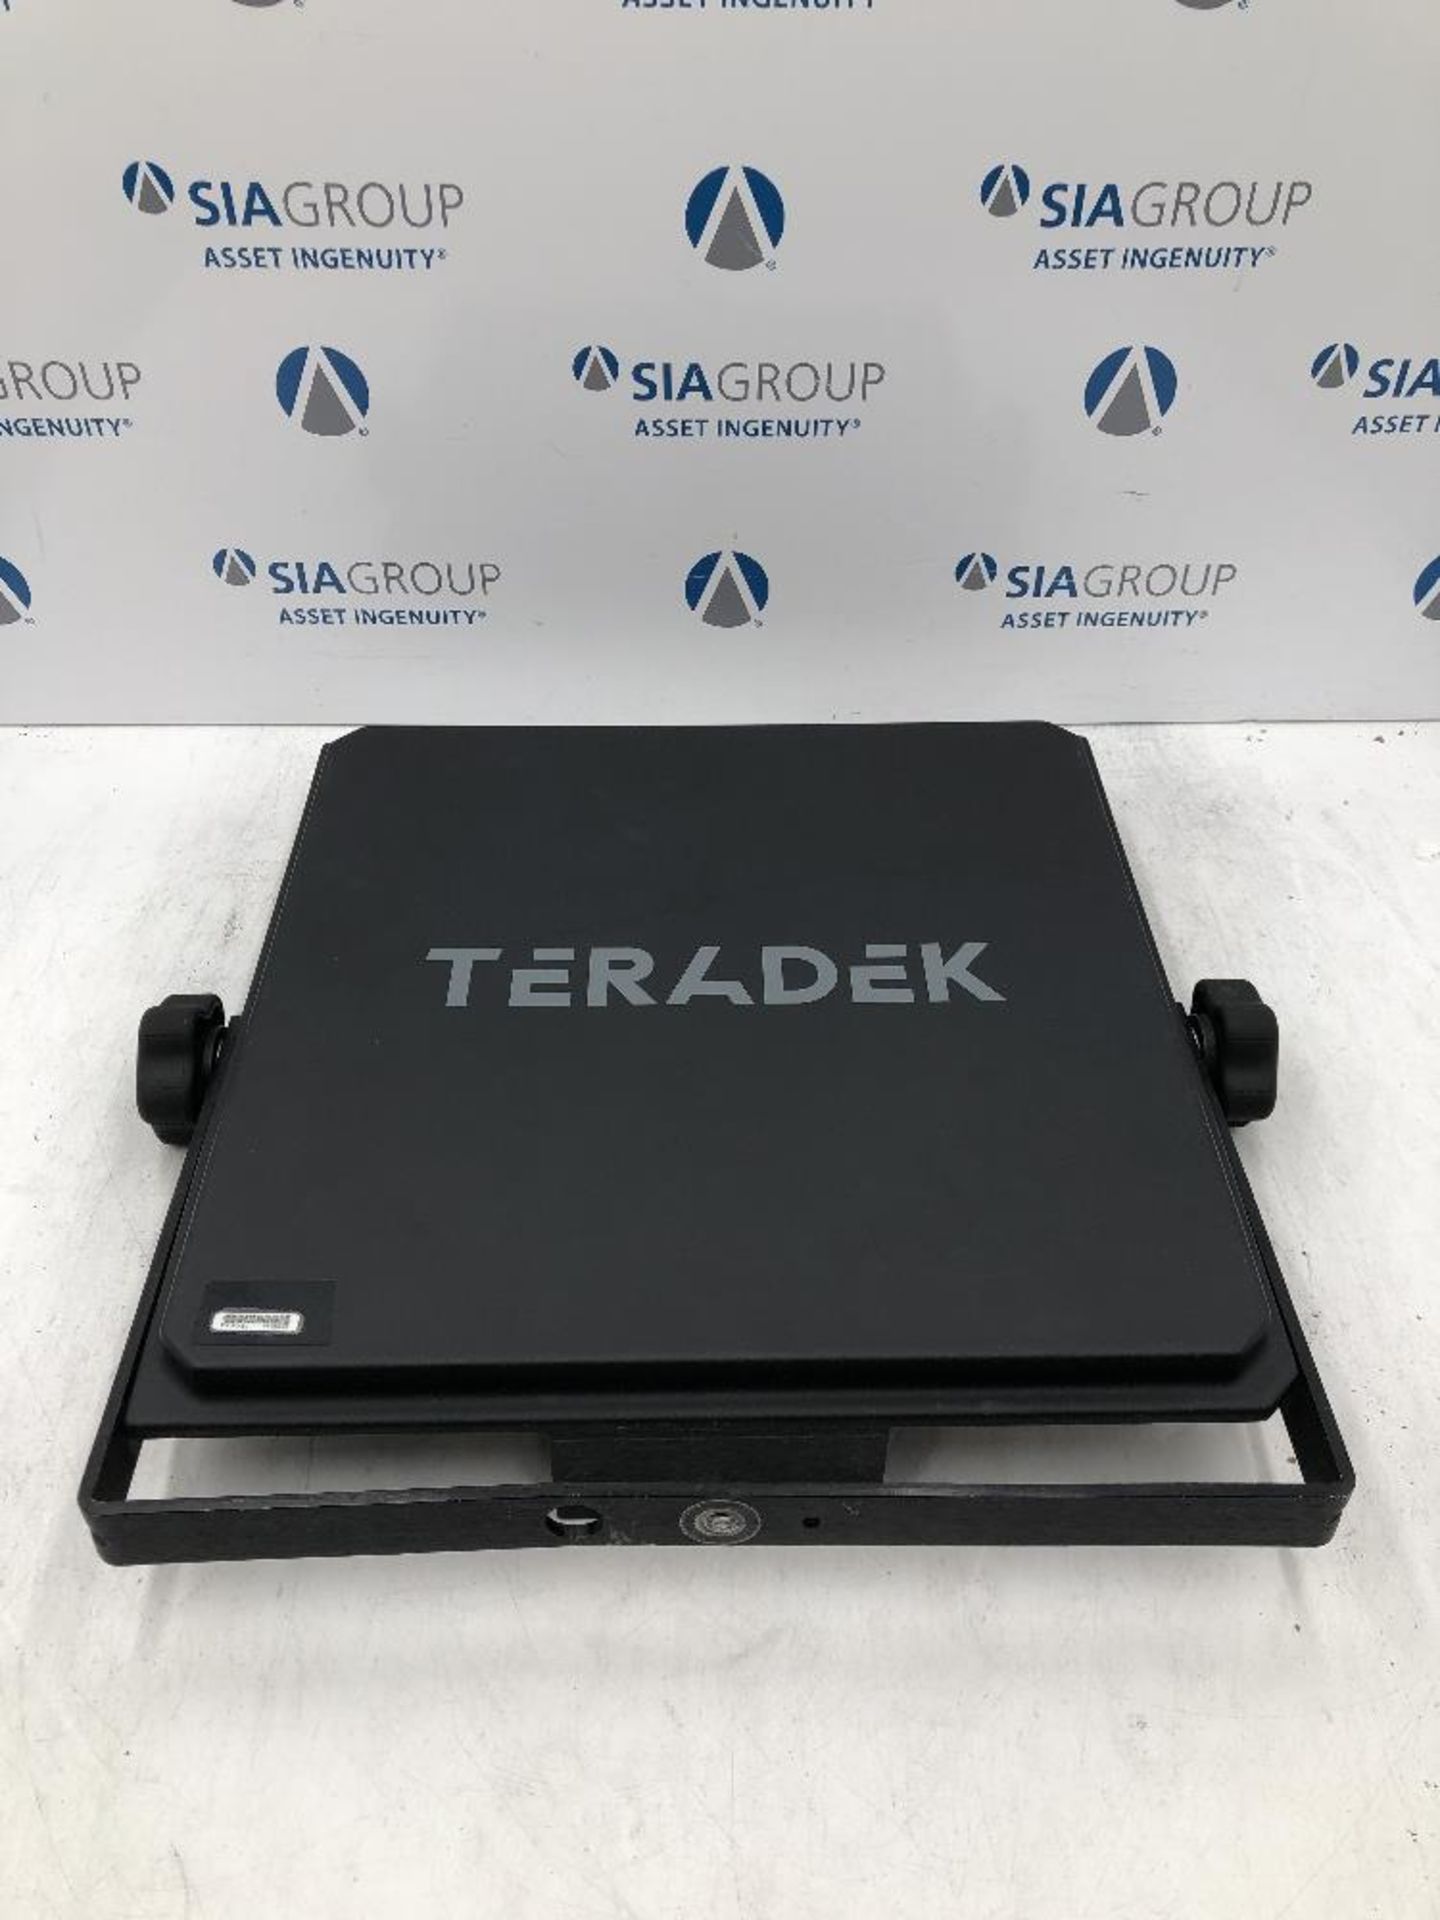 Teradek Bolt 3000 Array Panel/Antenna With Array Mount And Carry Case - Image 2 of 4